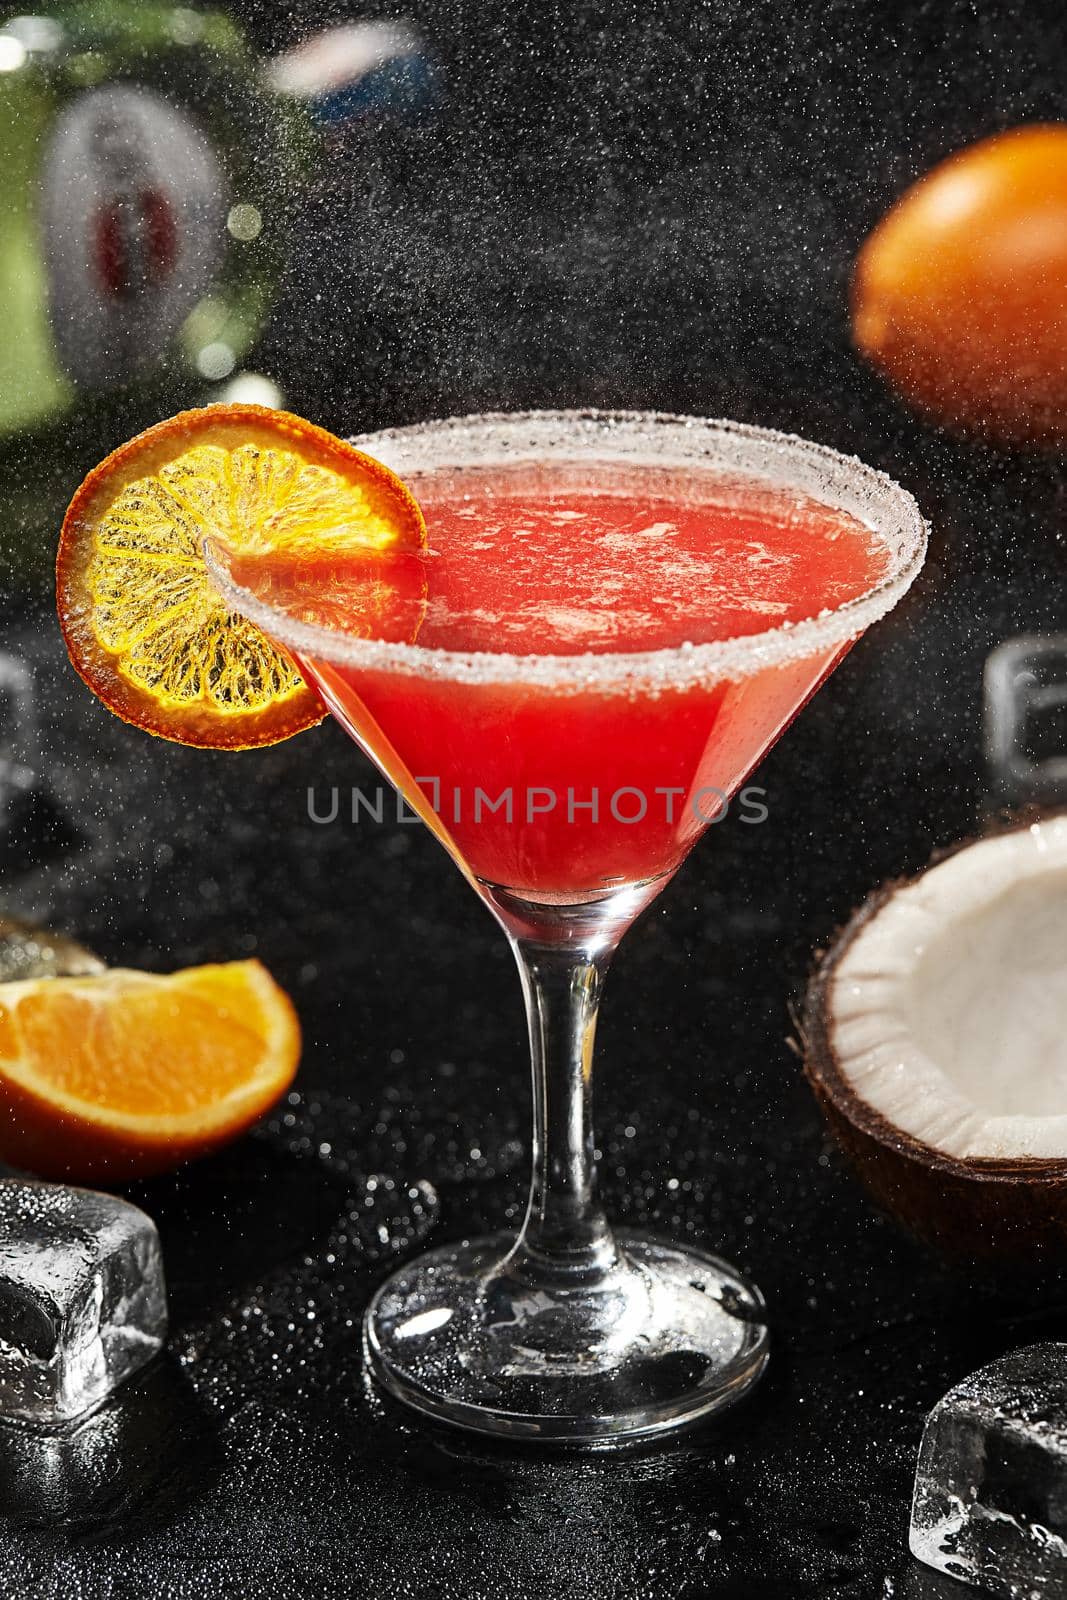 Exotic cocktail from martini with tropical flavours of coconut liqueur, citrus notes of orange juice and sweetness of pomegranate syrup garnished with candied orange slice on black background